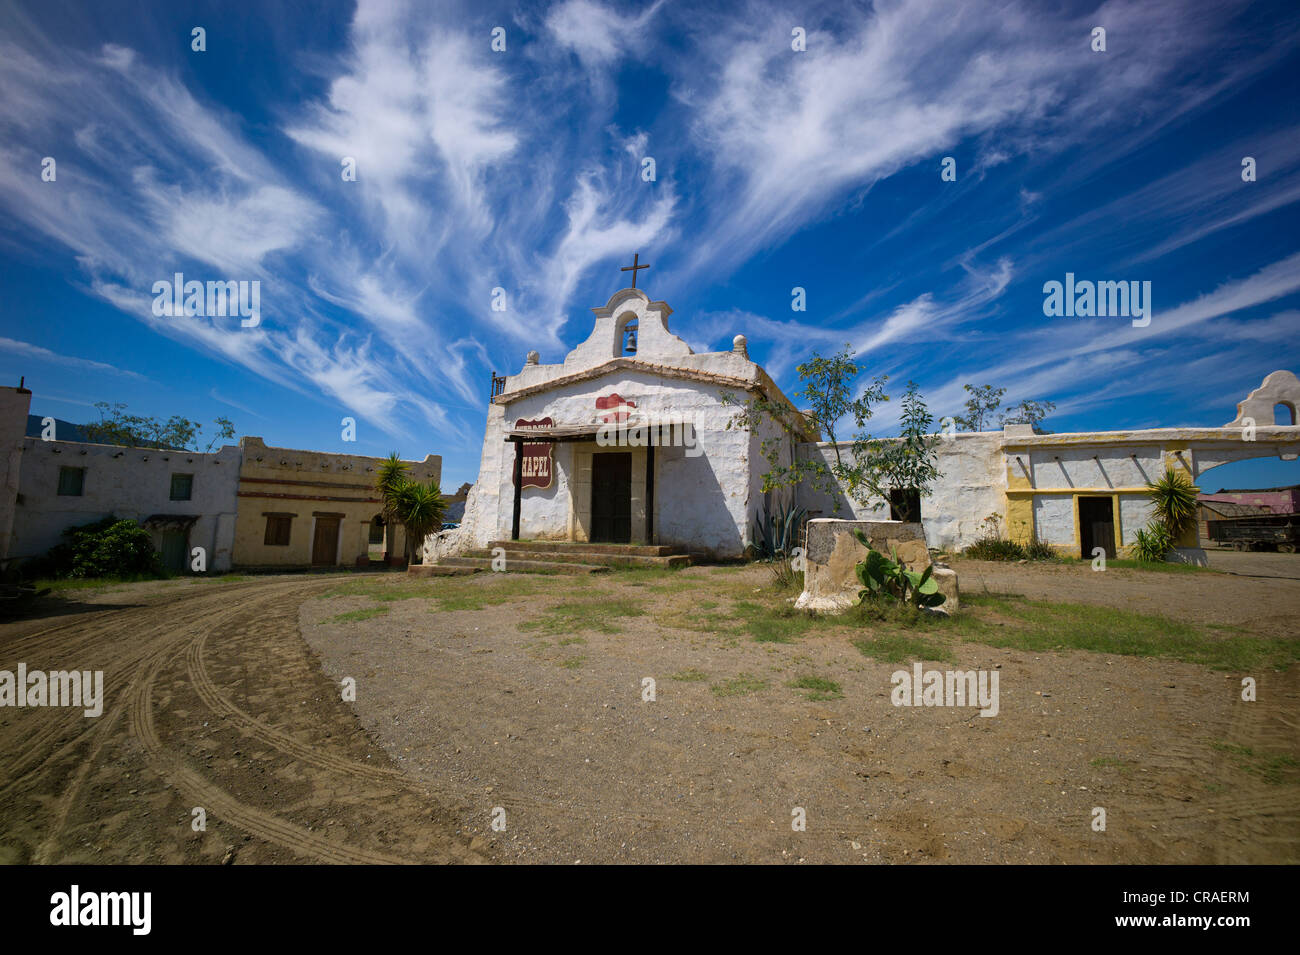 Fort Bravo, western town, former film set, now a tourist attraction, Tabernas, Andalusia, Spain, Europe Stock Photo